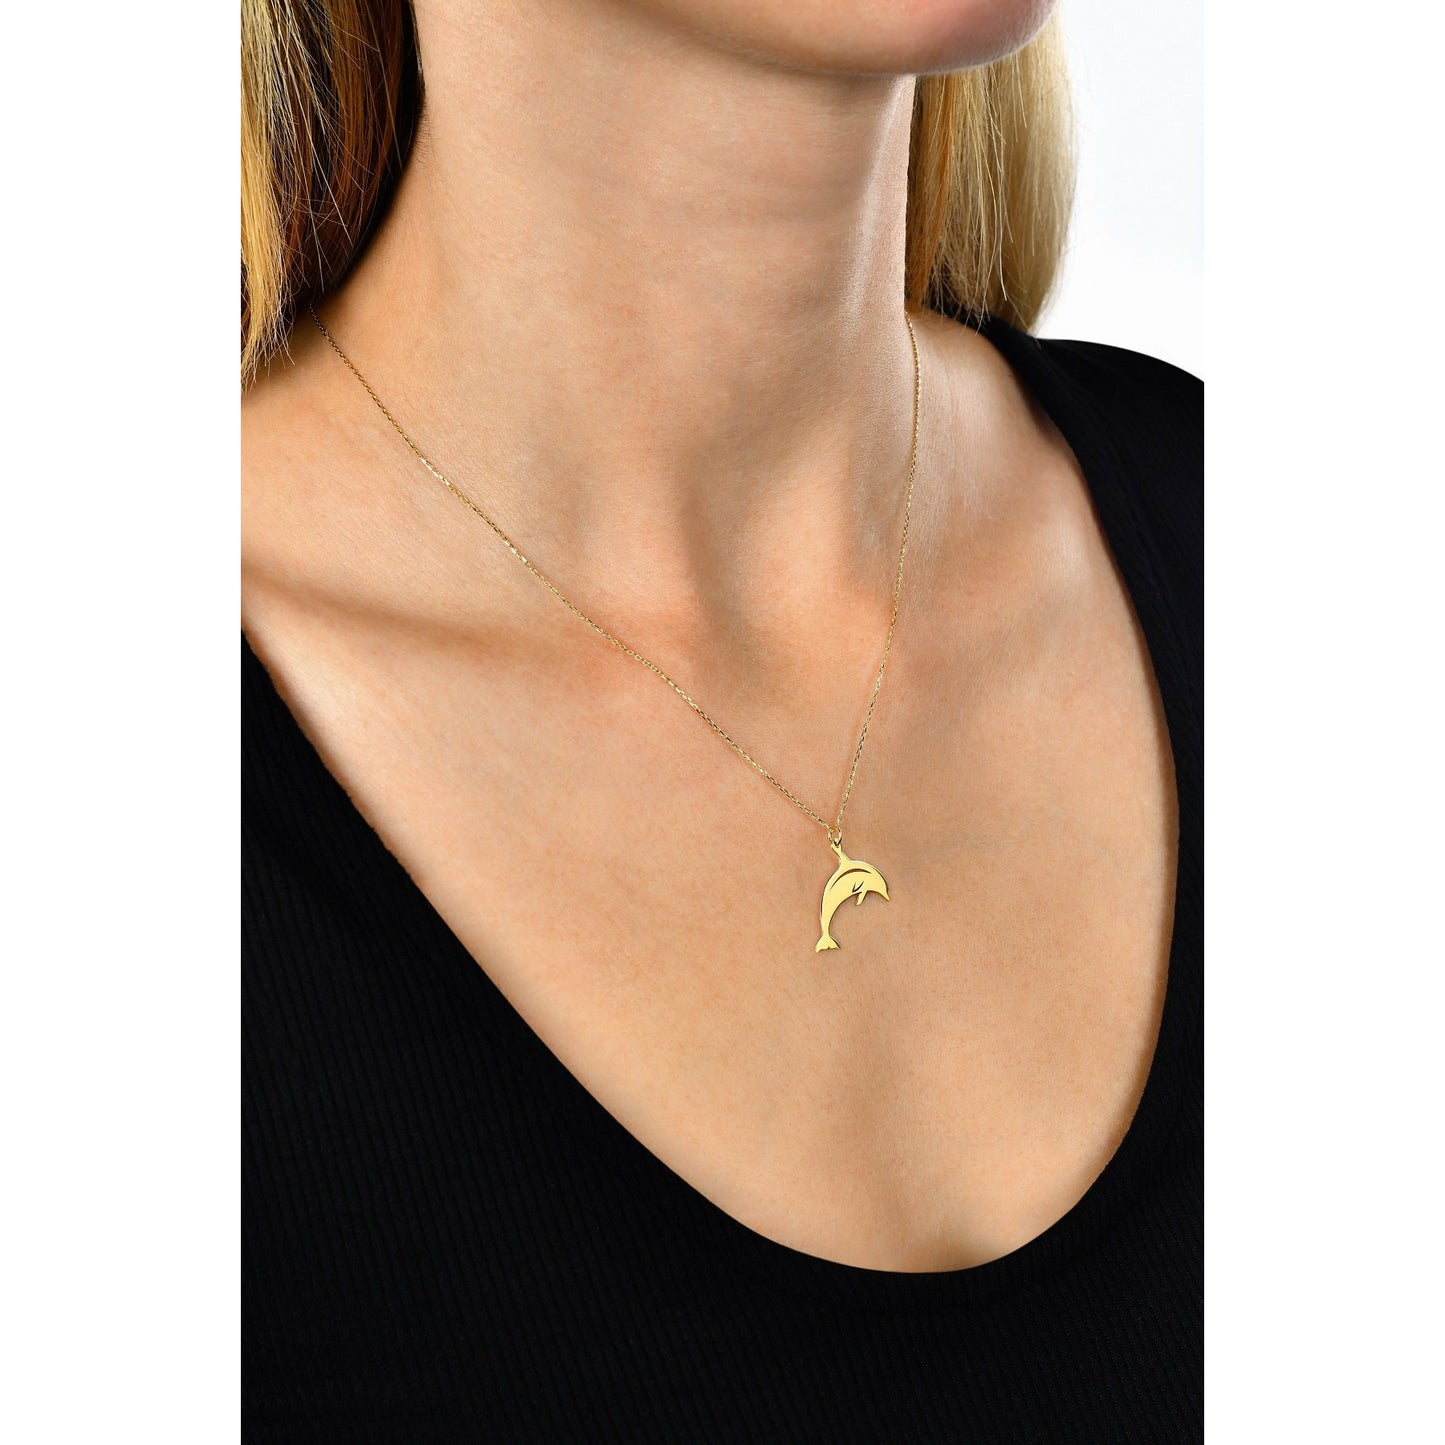 Special Design Gift 14K Gold Dolphin Necklace 